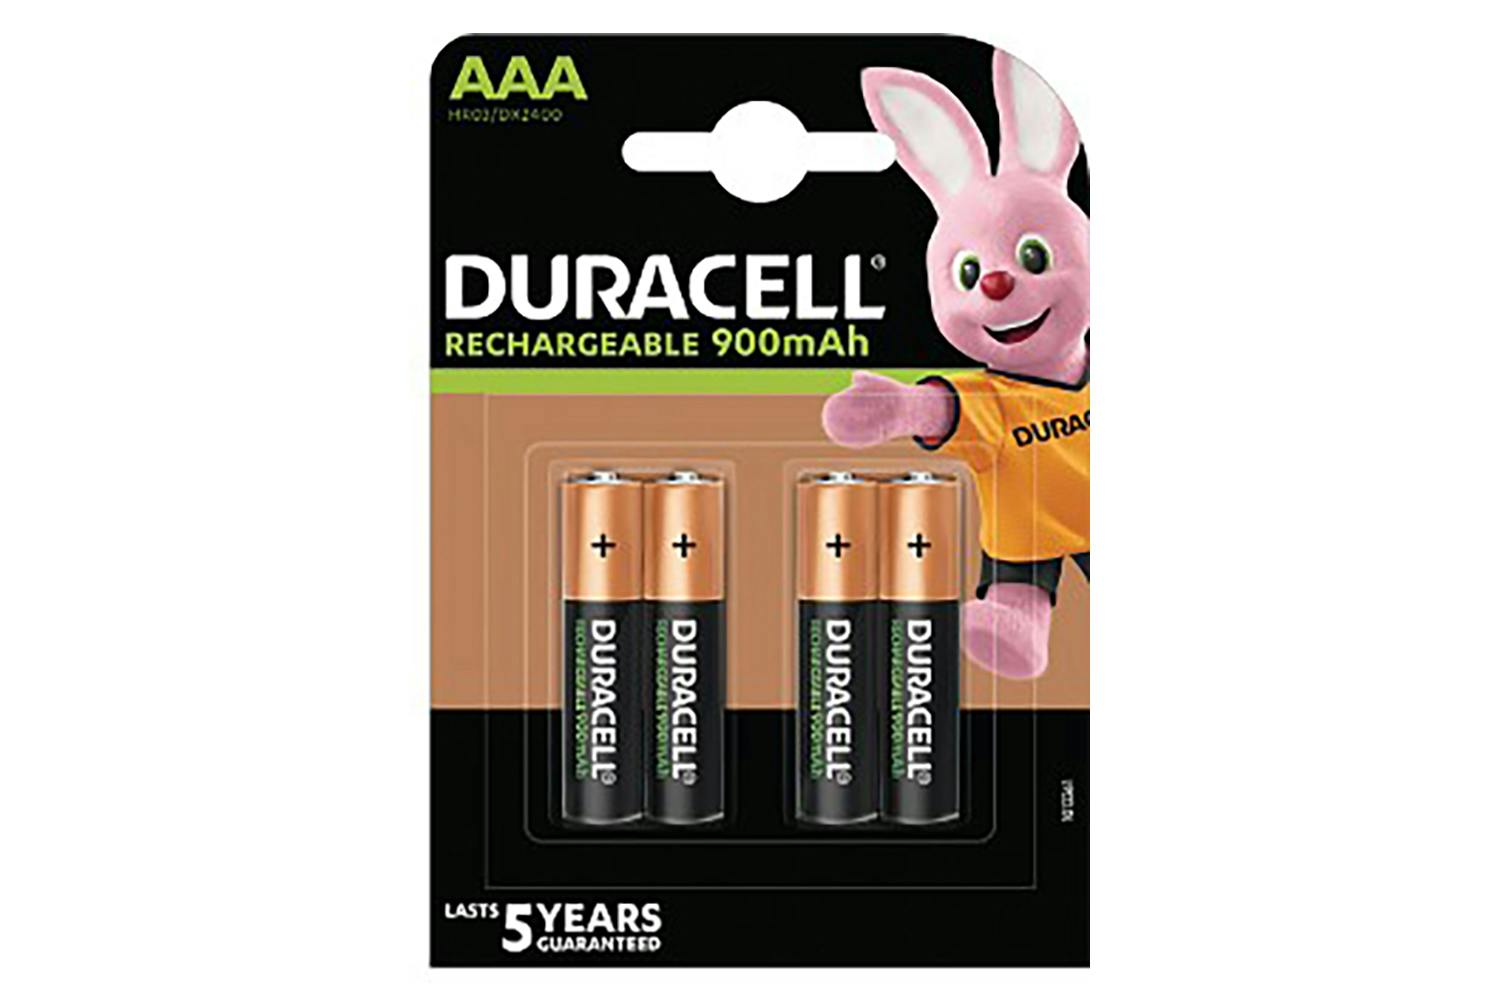 Duracell Ultra Rechargeable AAA 900mAh 4 Pack